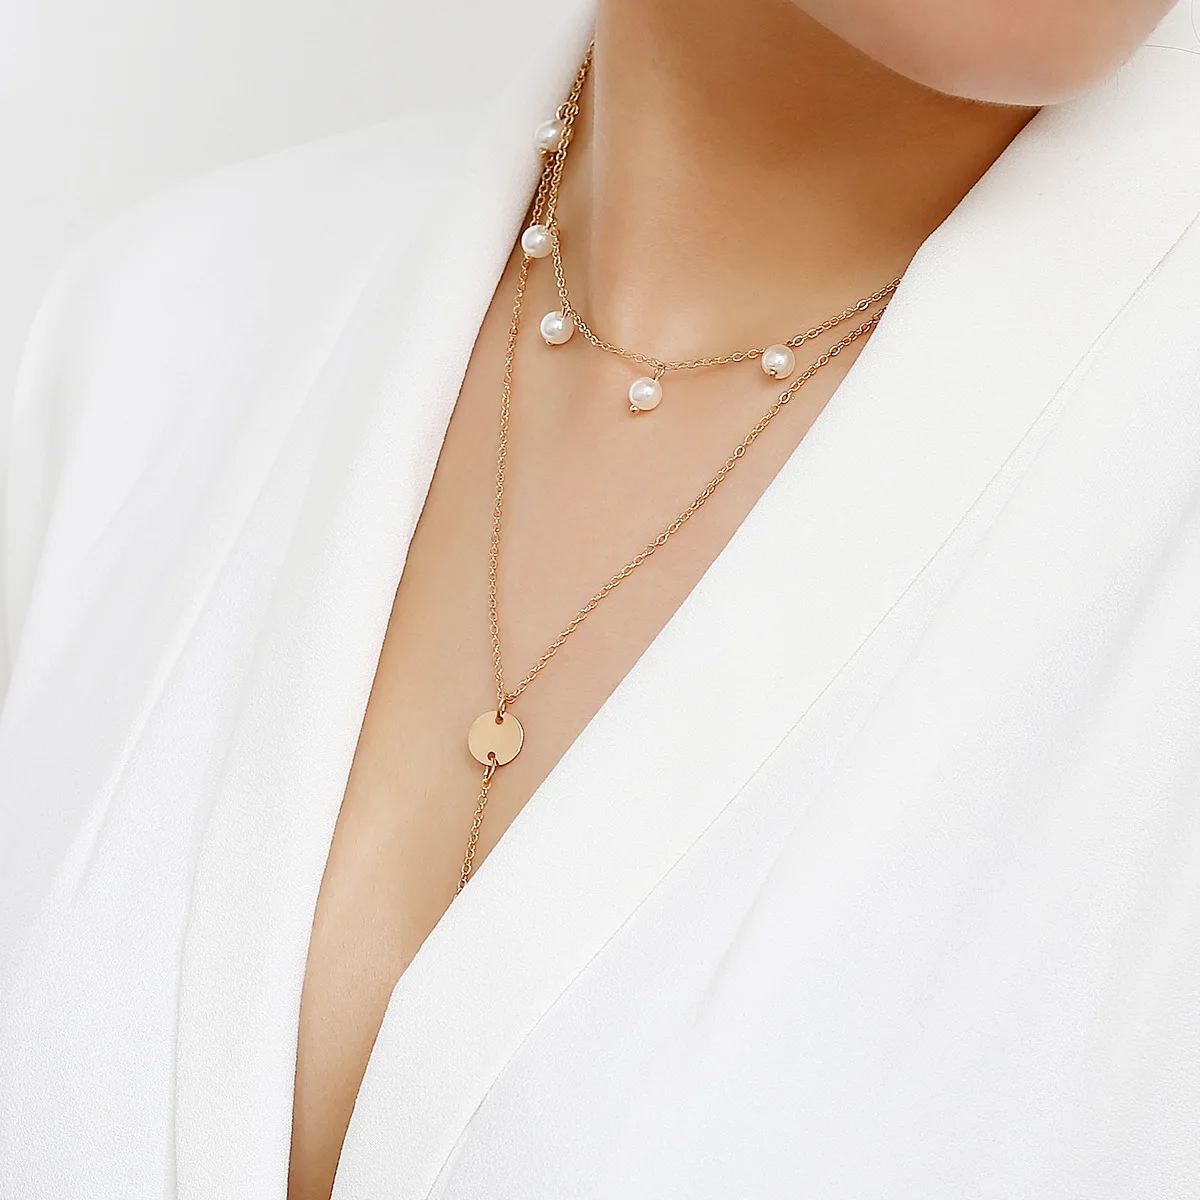 Multi lens necklace with pearl necklace SAUTOIR in fashion business